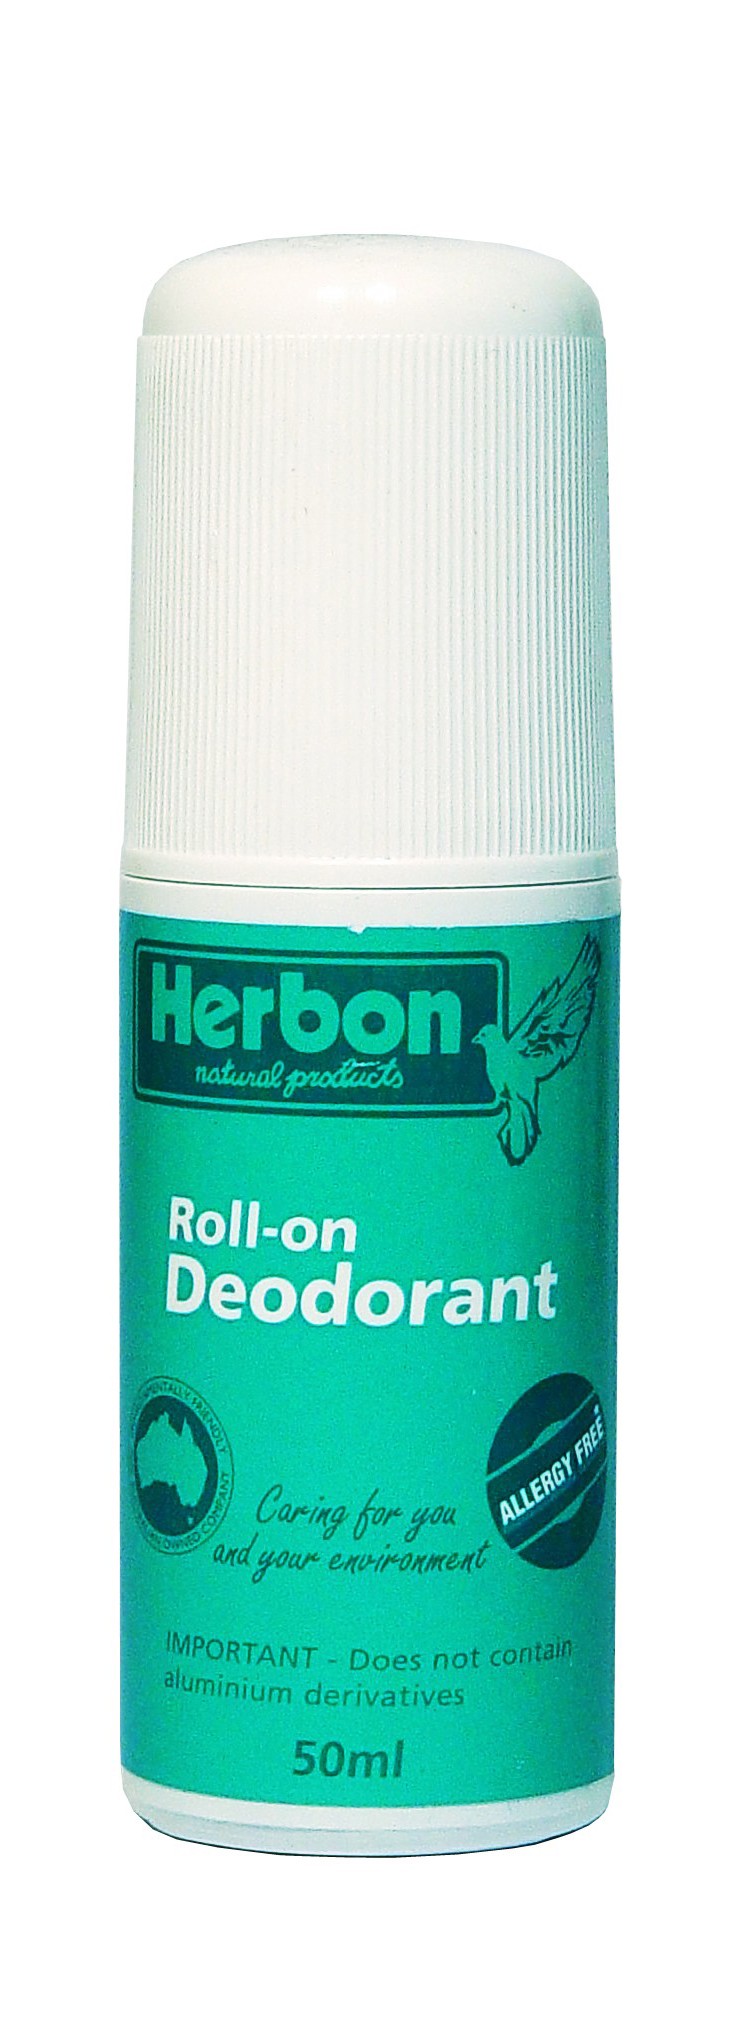 Herbon Natural Products, Roll-On Deodorant, 50 ml